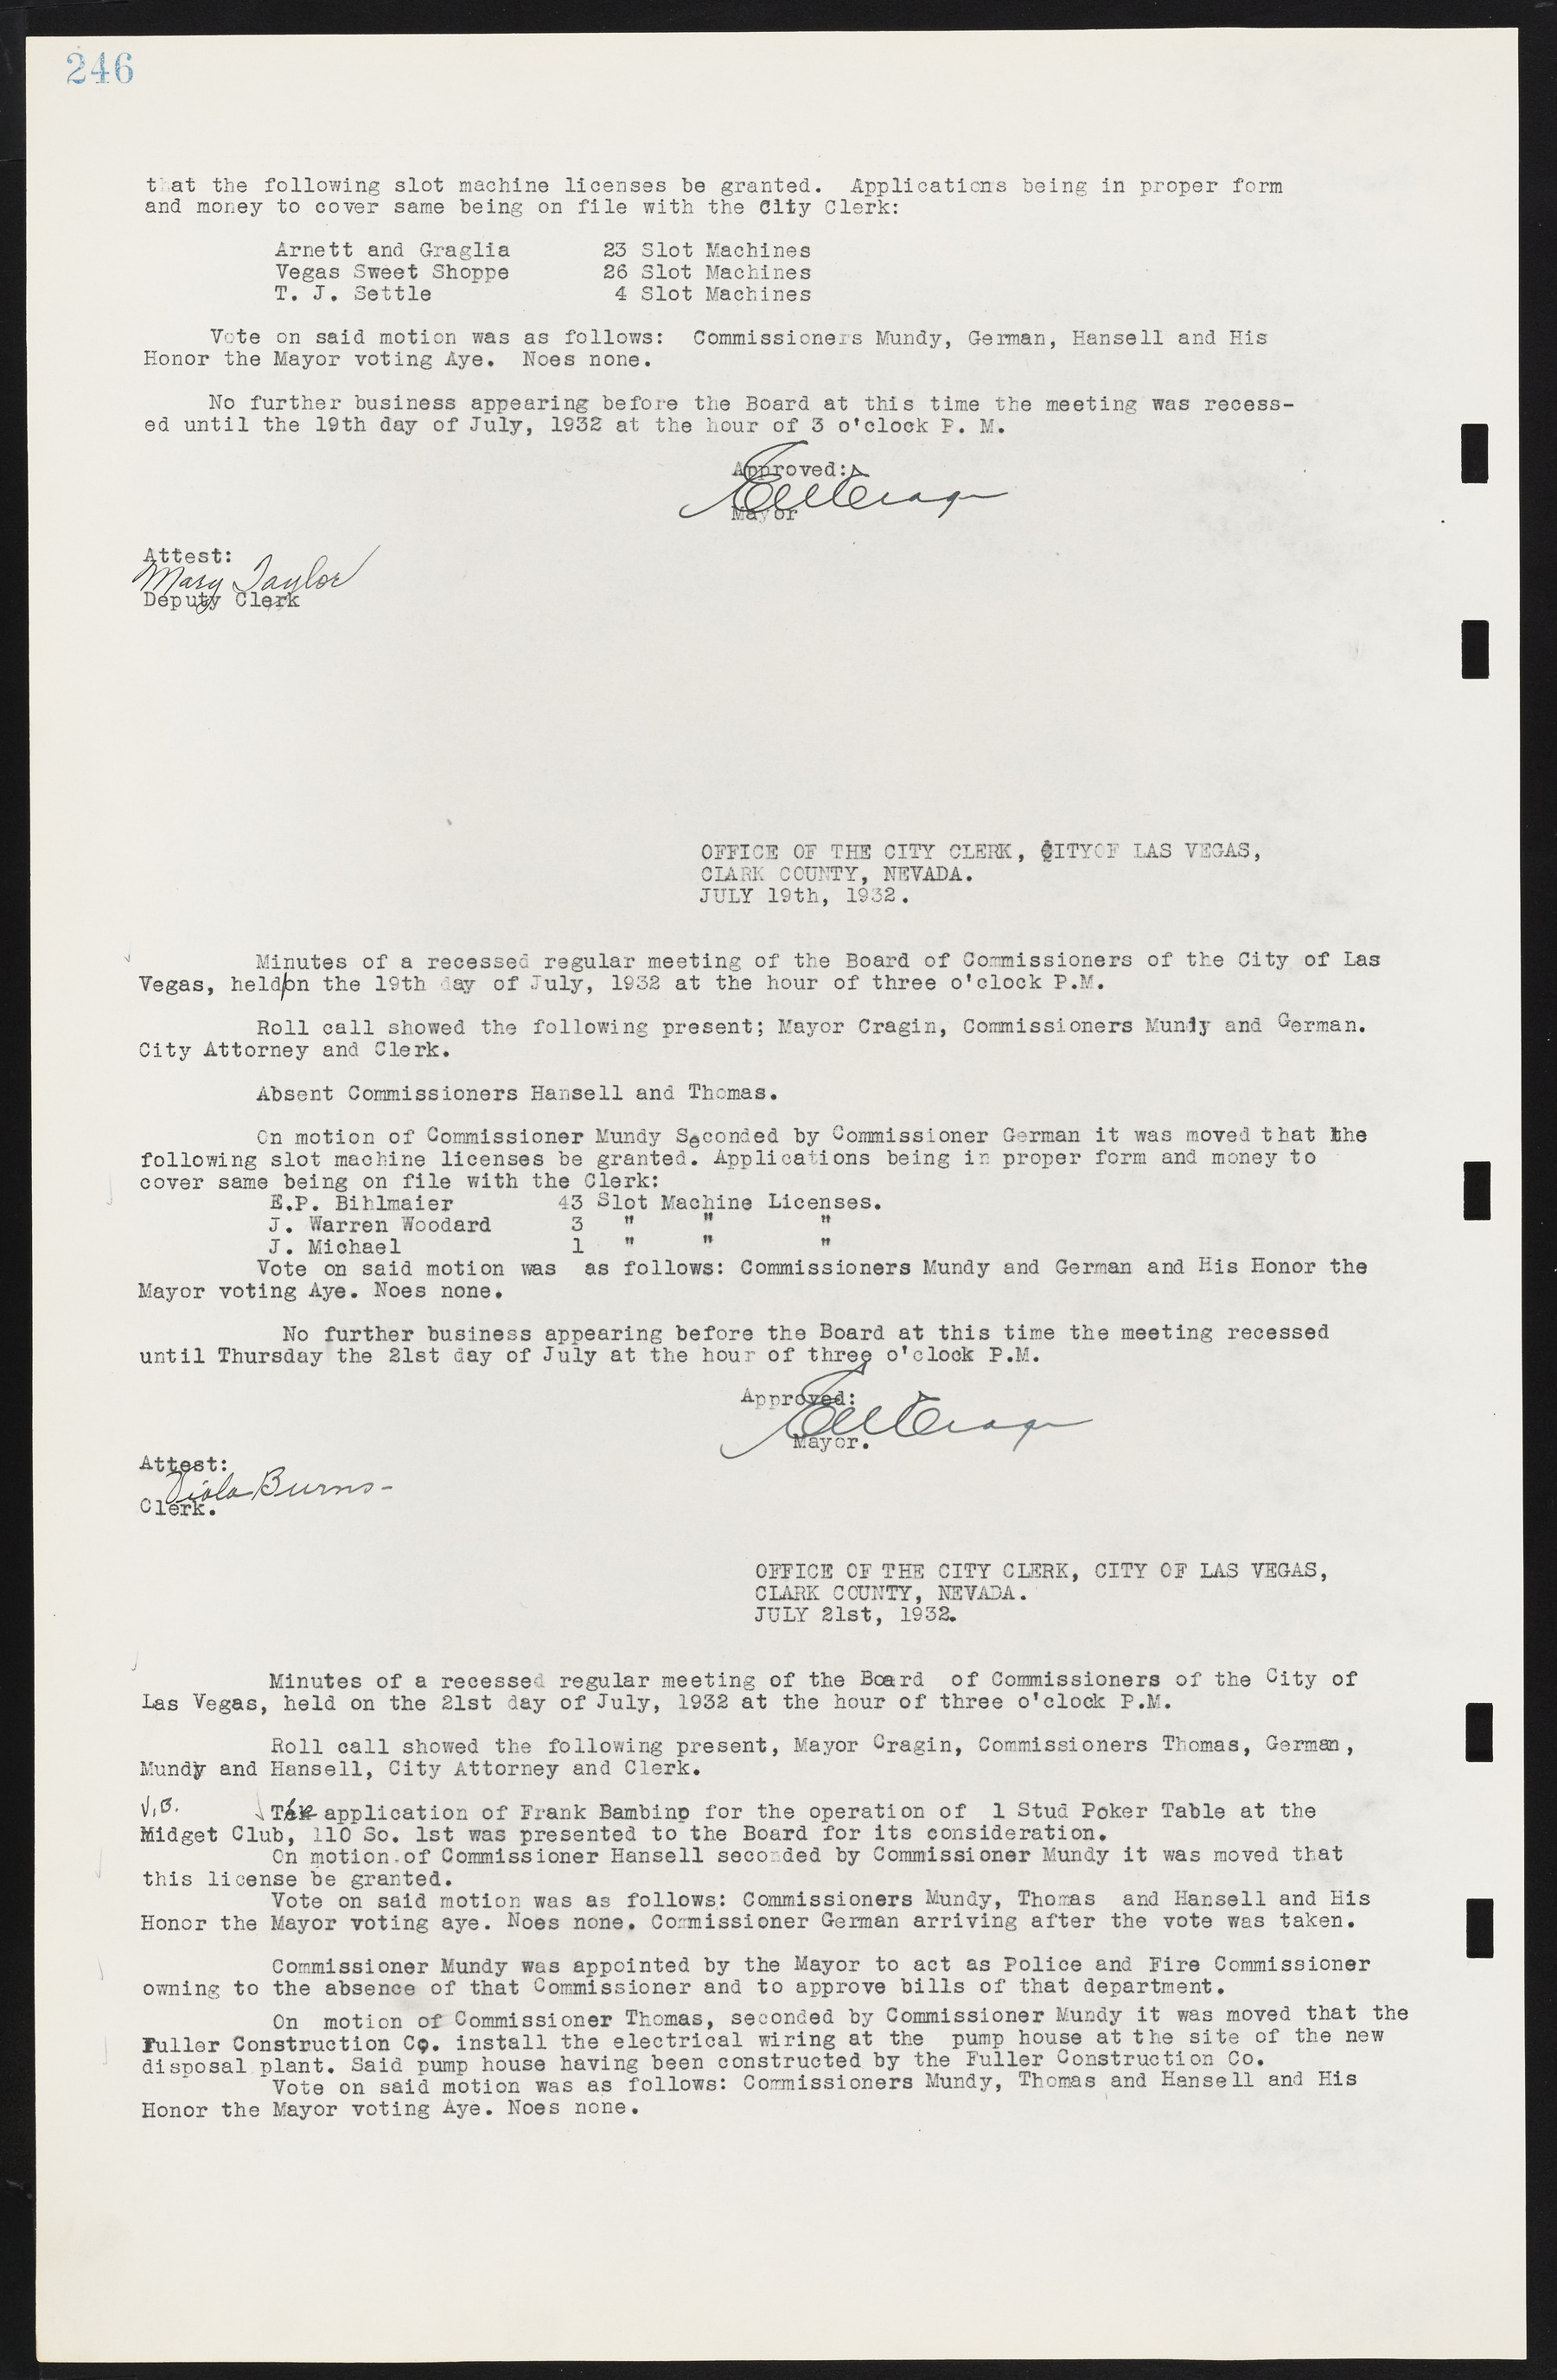 Las Vegas City Commission Minutes, May 14, 1929 to February 11, 1937, lvc000003-252